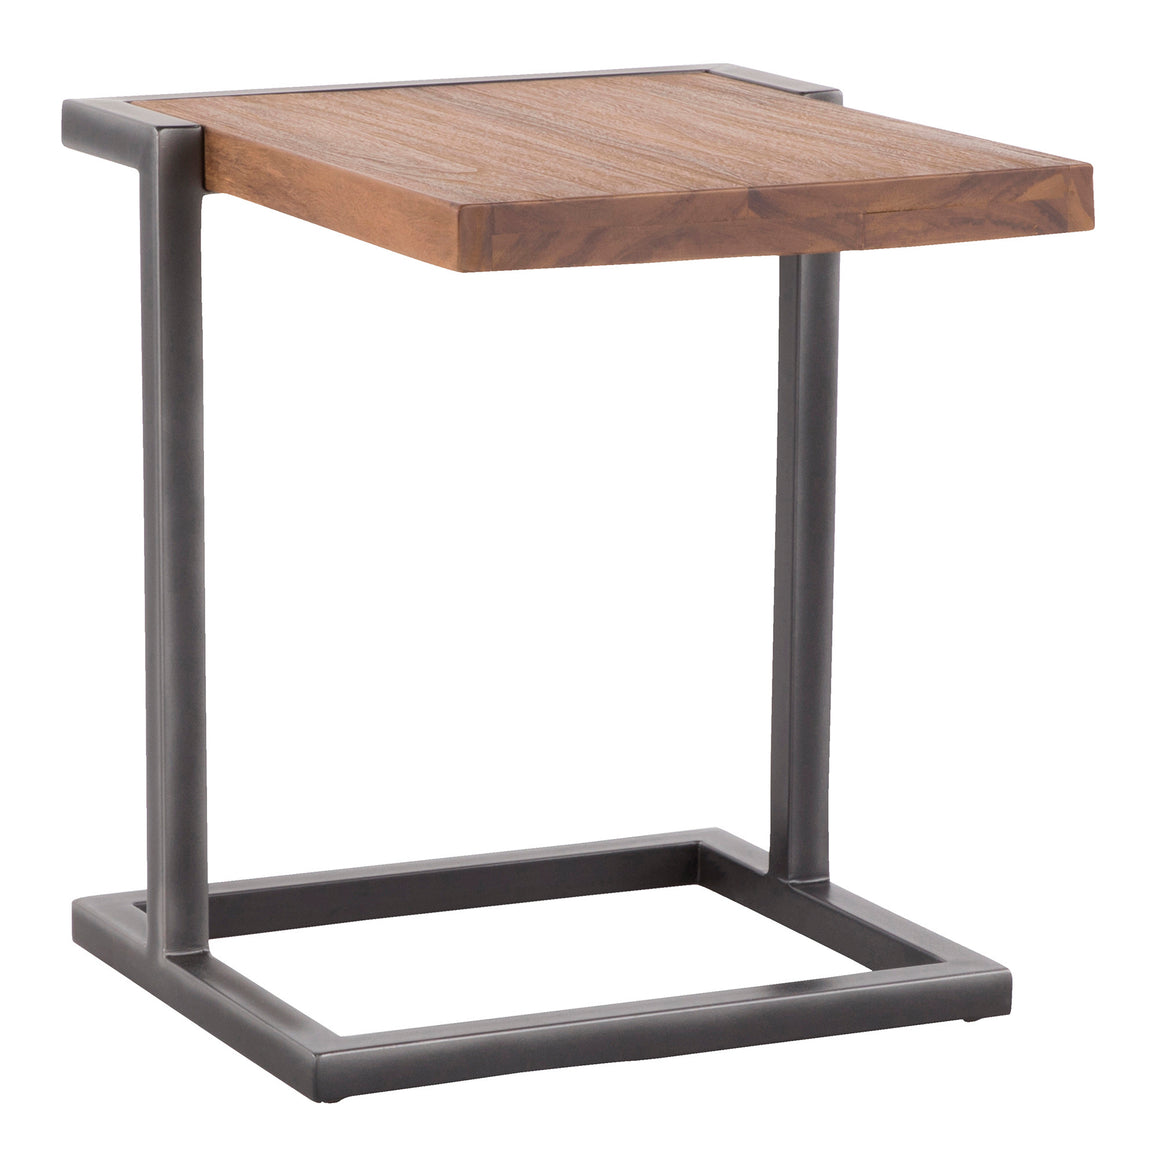 Java Industrial Side Table in Antique Metal and Teak Wood by LumiSource